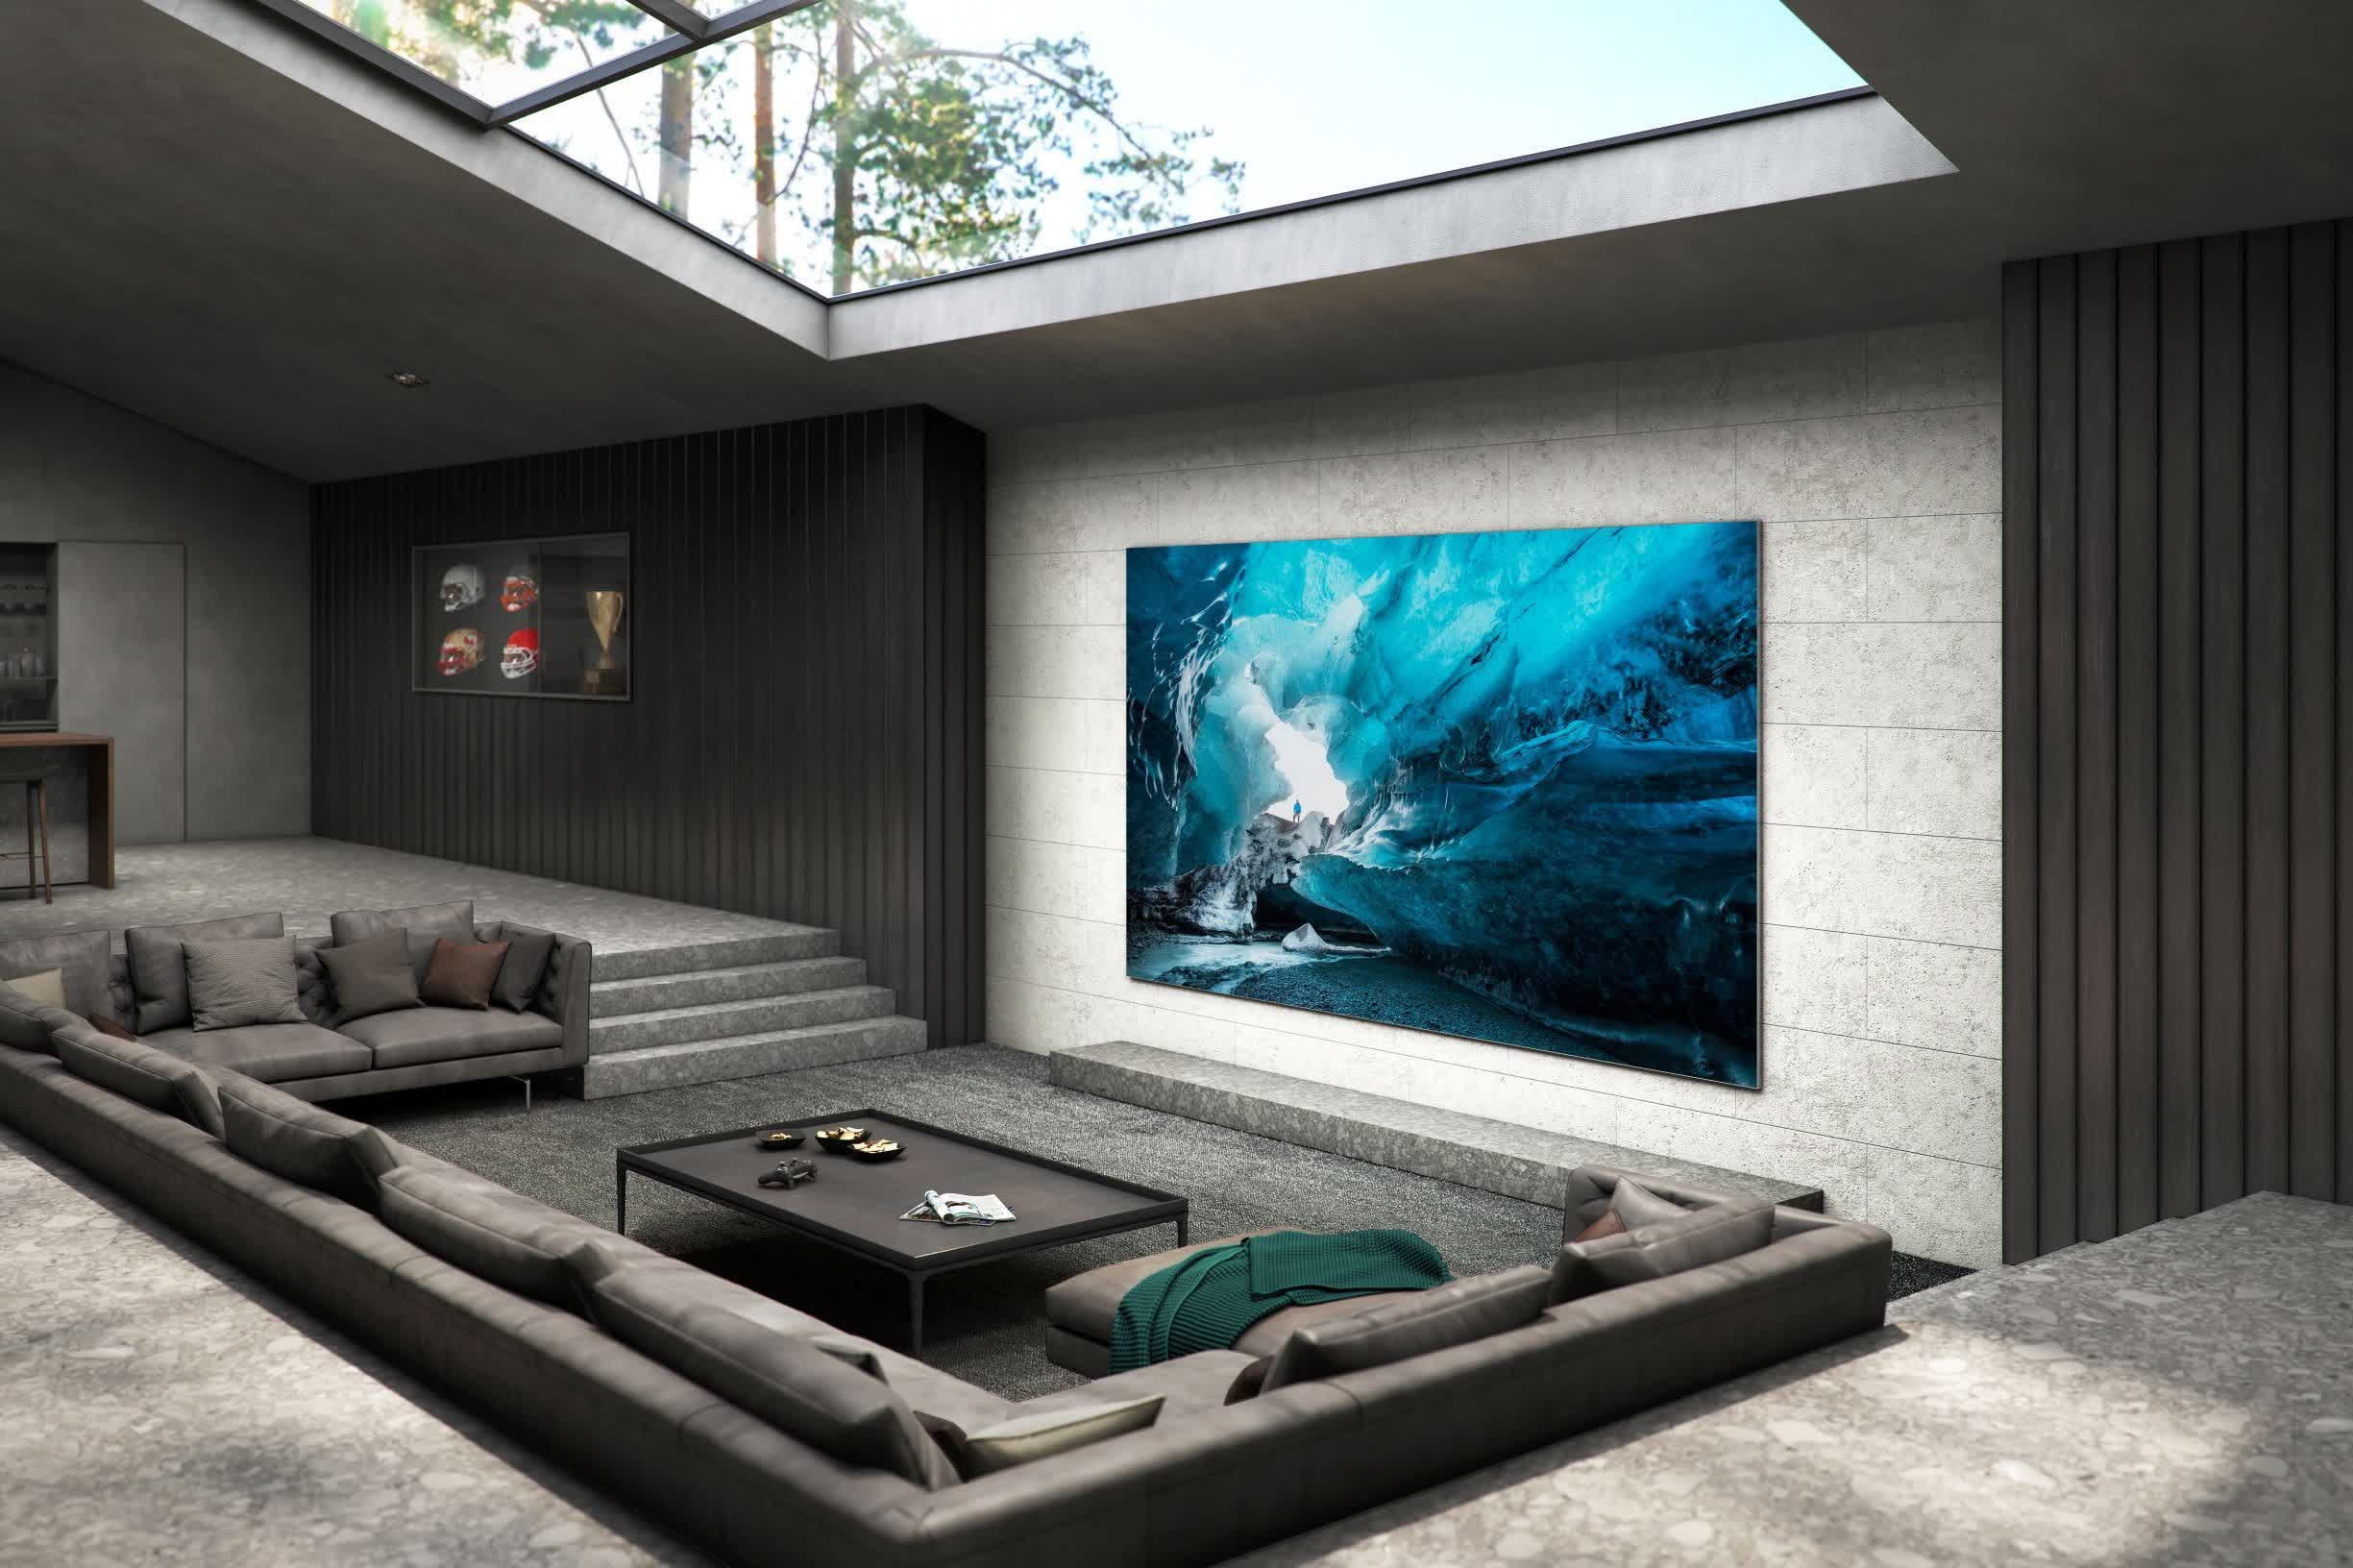 Samsung reveals its 110-inch MicroLED 4K television